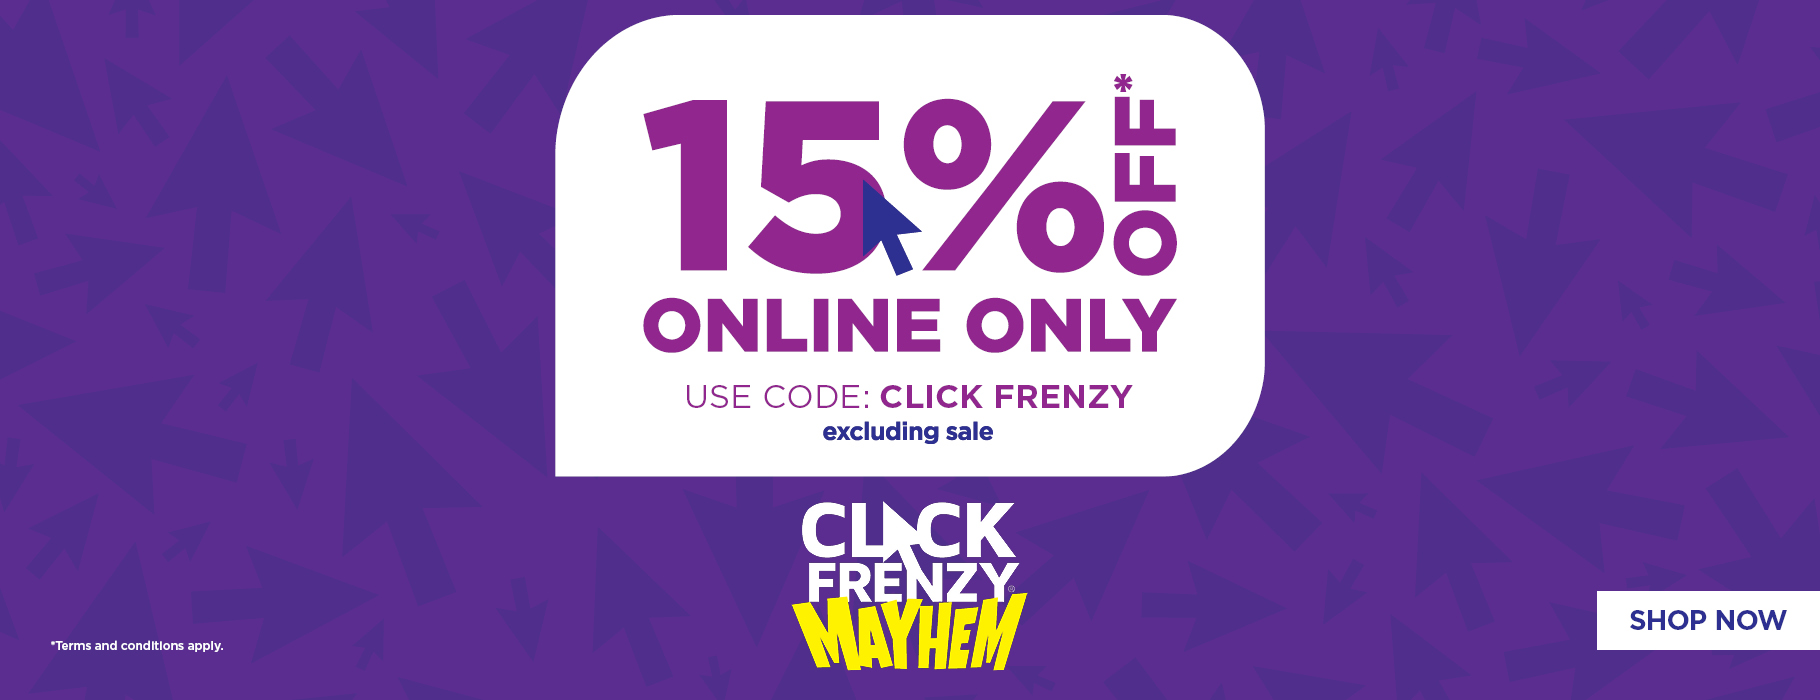 Amart Furniture Frenzy sale - 15% OFF on your order with promo code